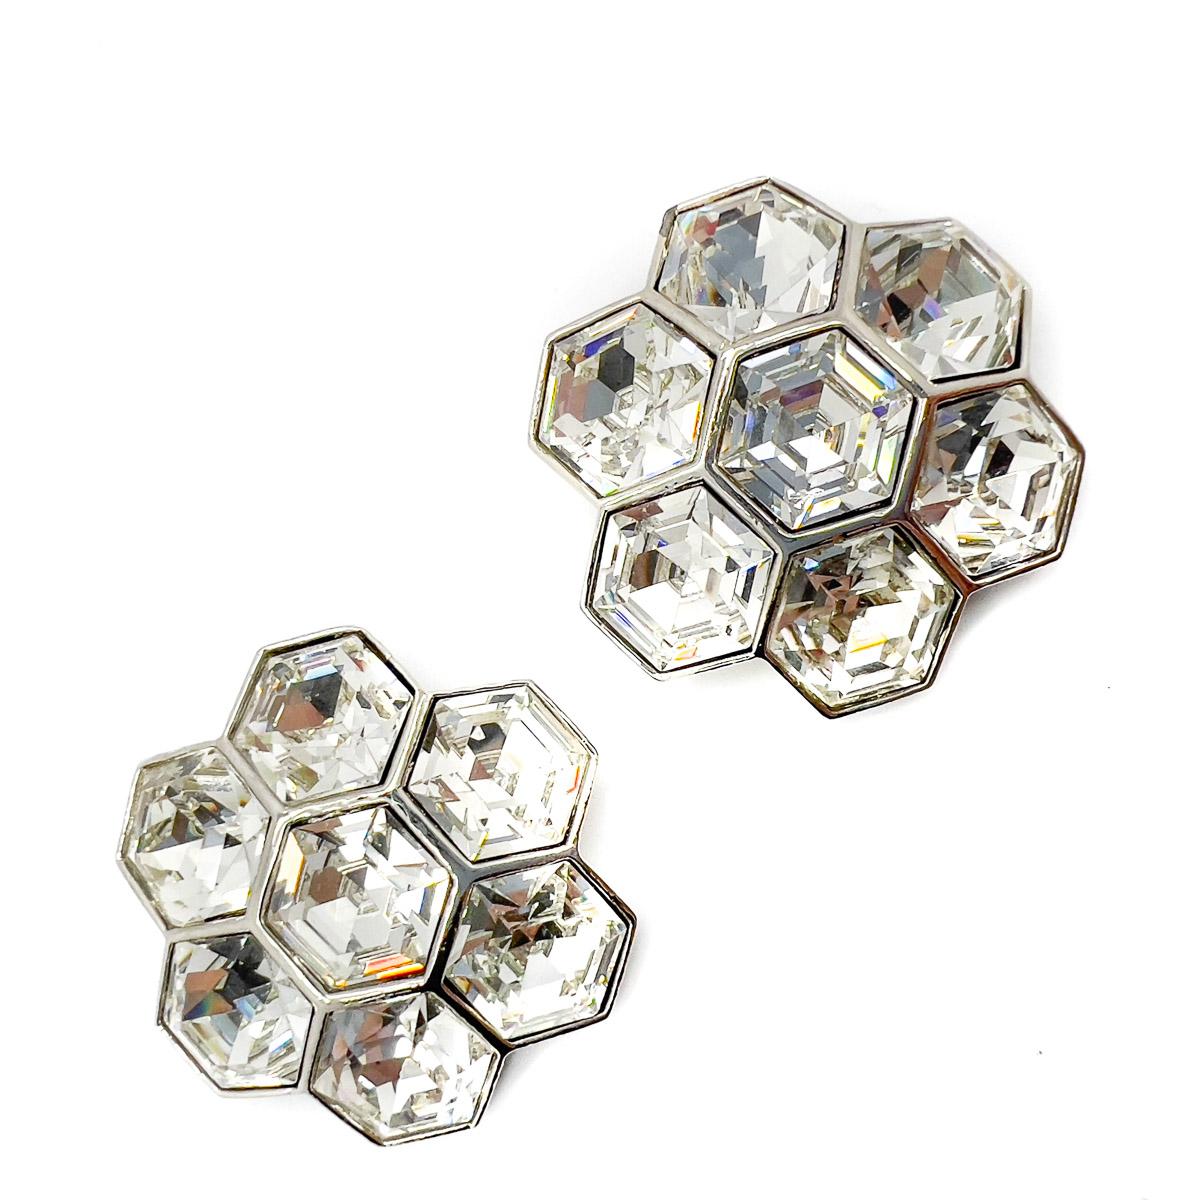 Vintage Art Deco Inspired Hexagonal Crystal Floral Earrings 1980s In Good Condition For Sale In Wilmslow, GB